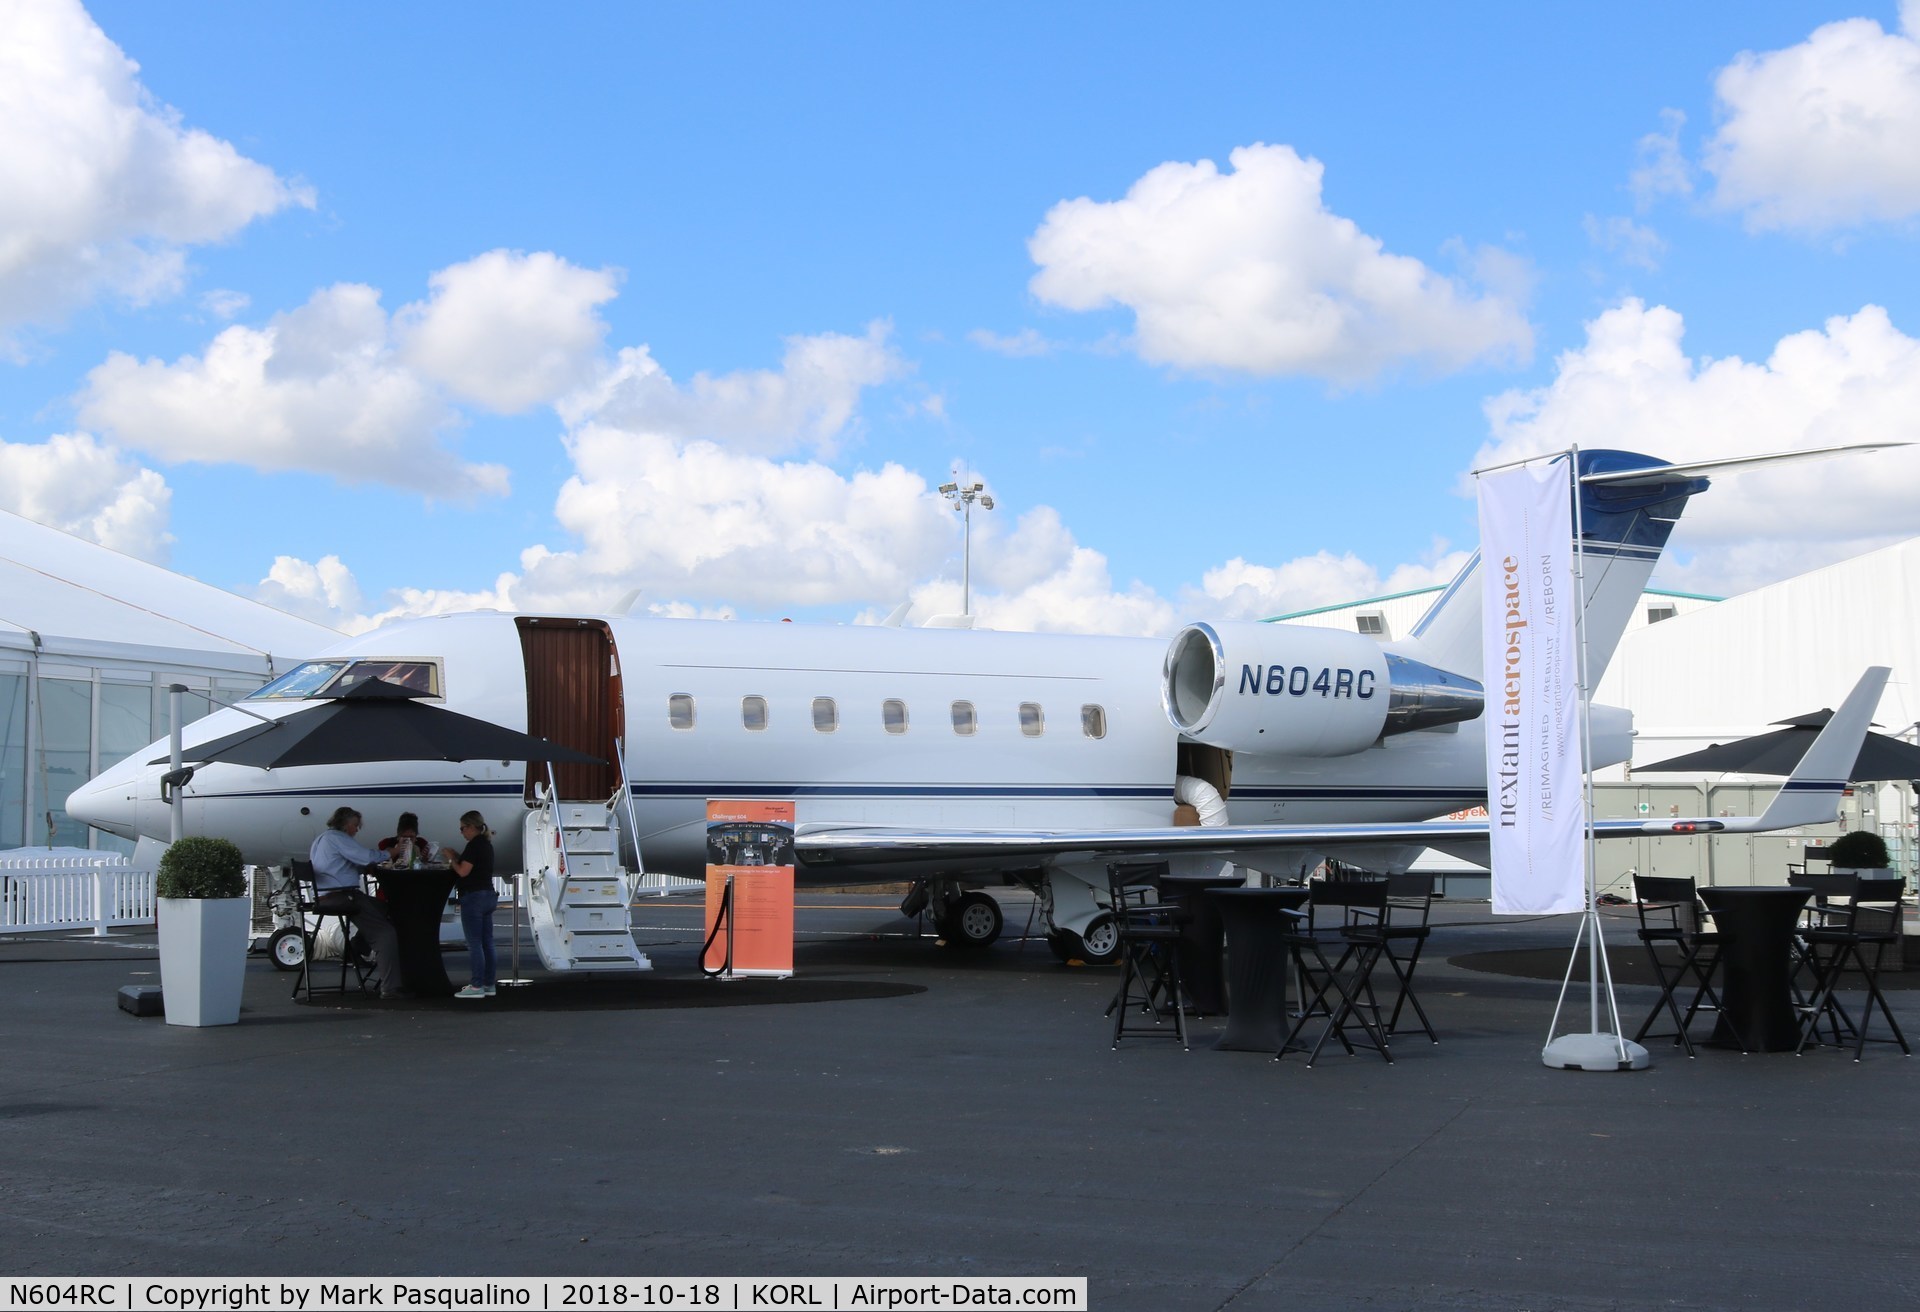 N604RC, 2006 Bombardier Challenger 604 (CL-600-2B16) C/N 5662, Challenger 604